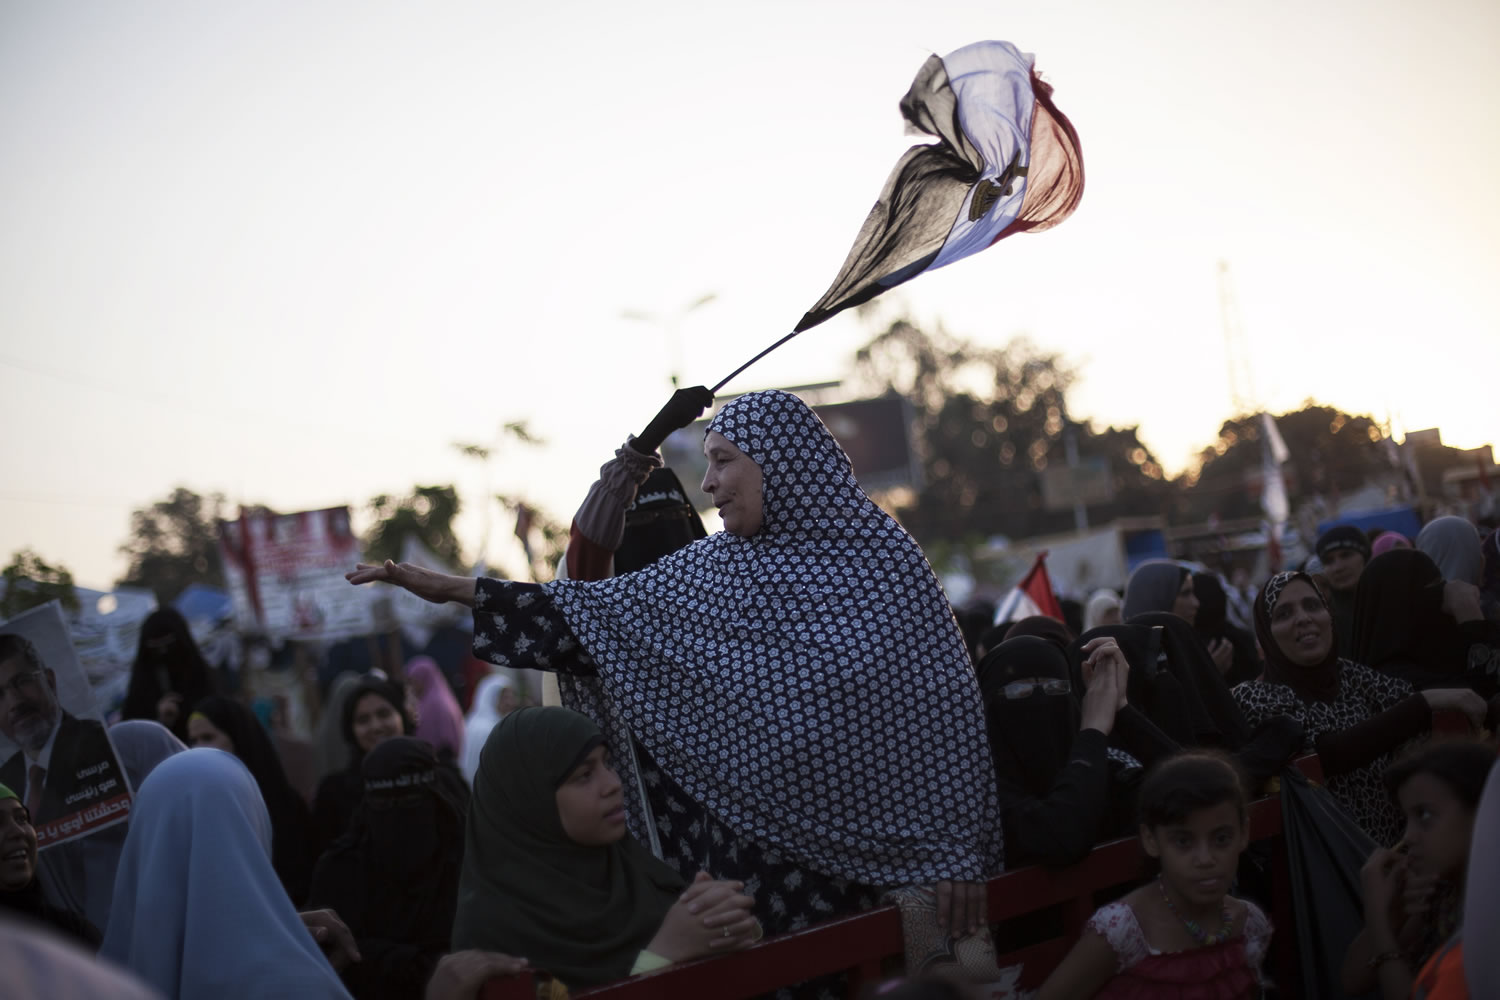 Supporters of Egypt's ousted President Mohammed Morsi are seen during a protest at the sit-in at Rabaah al-Adawiya Mosque, which is fortified with multiple walls of bricks, tires, metal barricades and sandbags, where protesters have installed their camp in Nasr City, Cairo, on Monday.